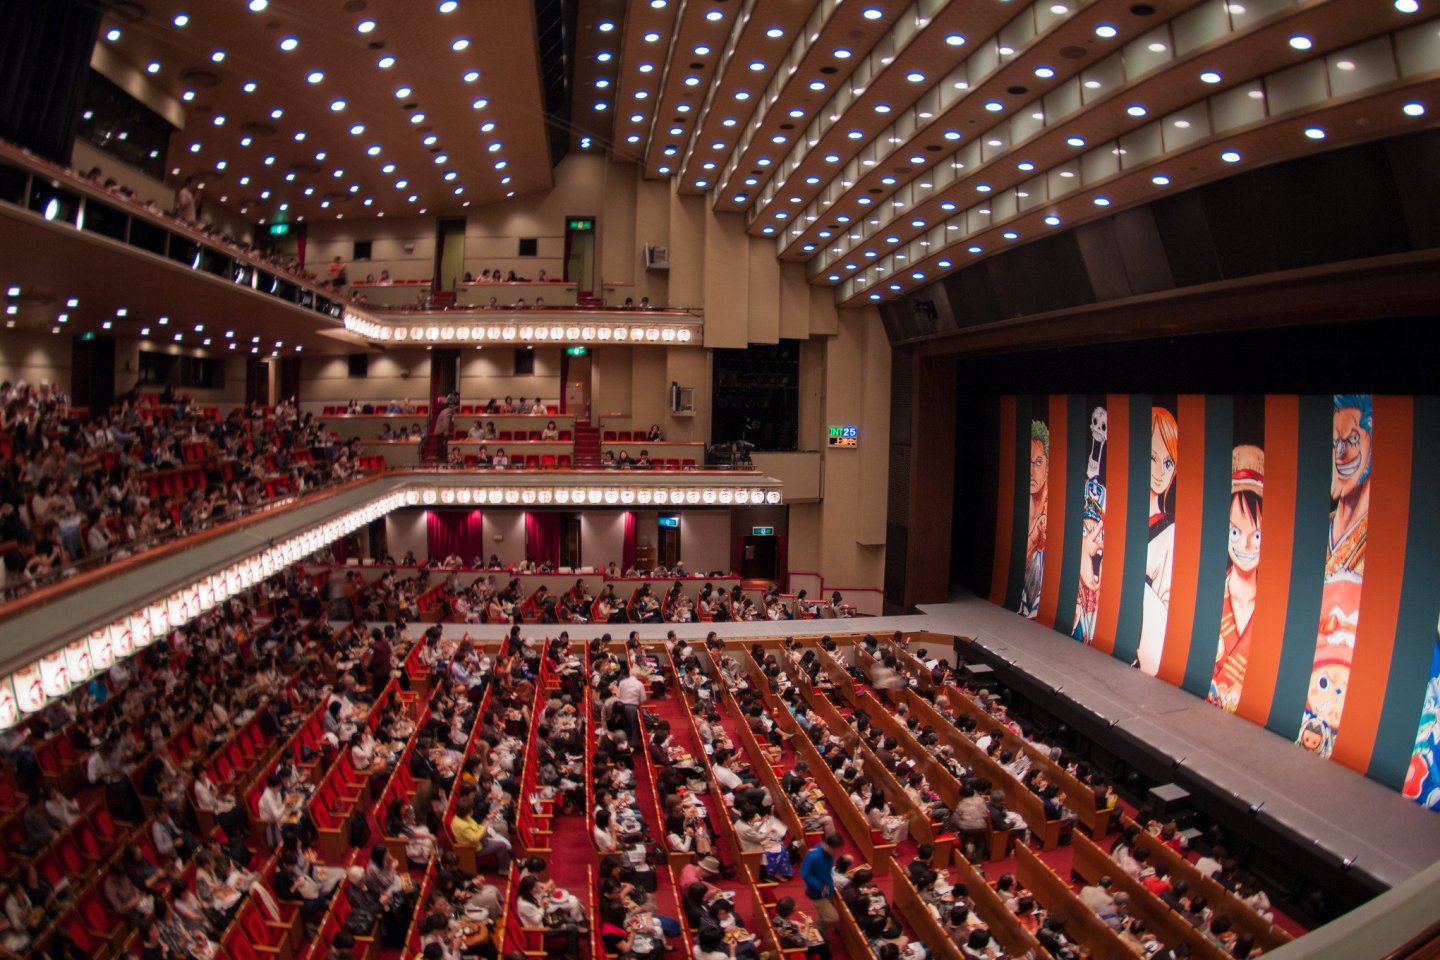 Inside the theater during the One Piece super kabuki performance